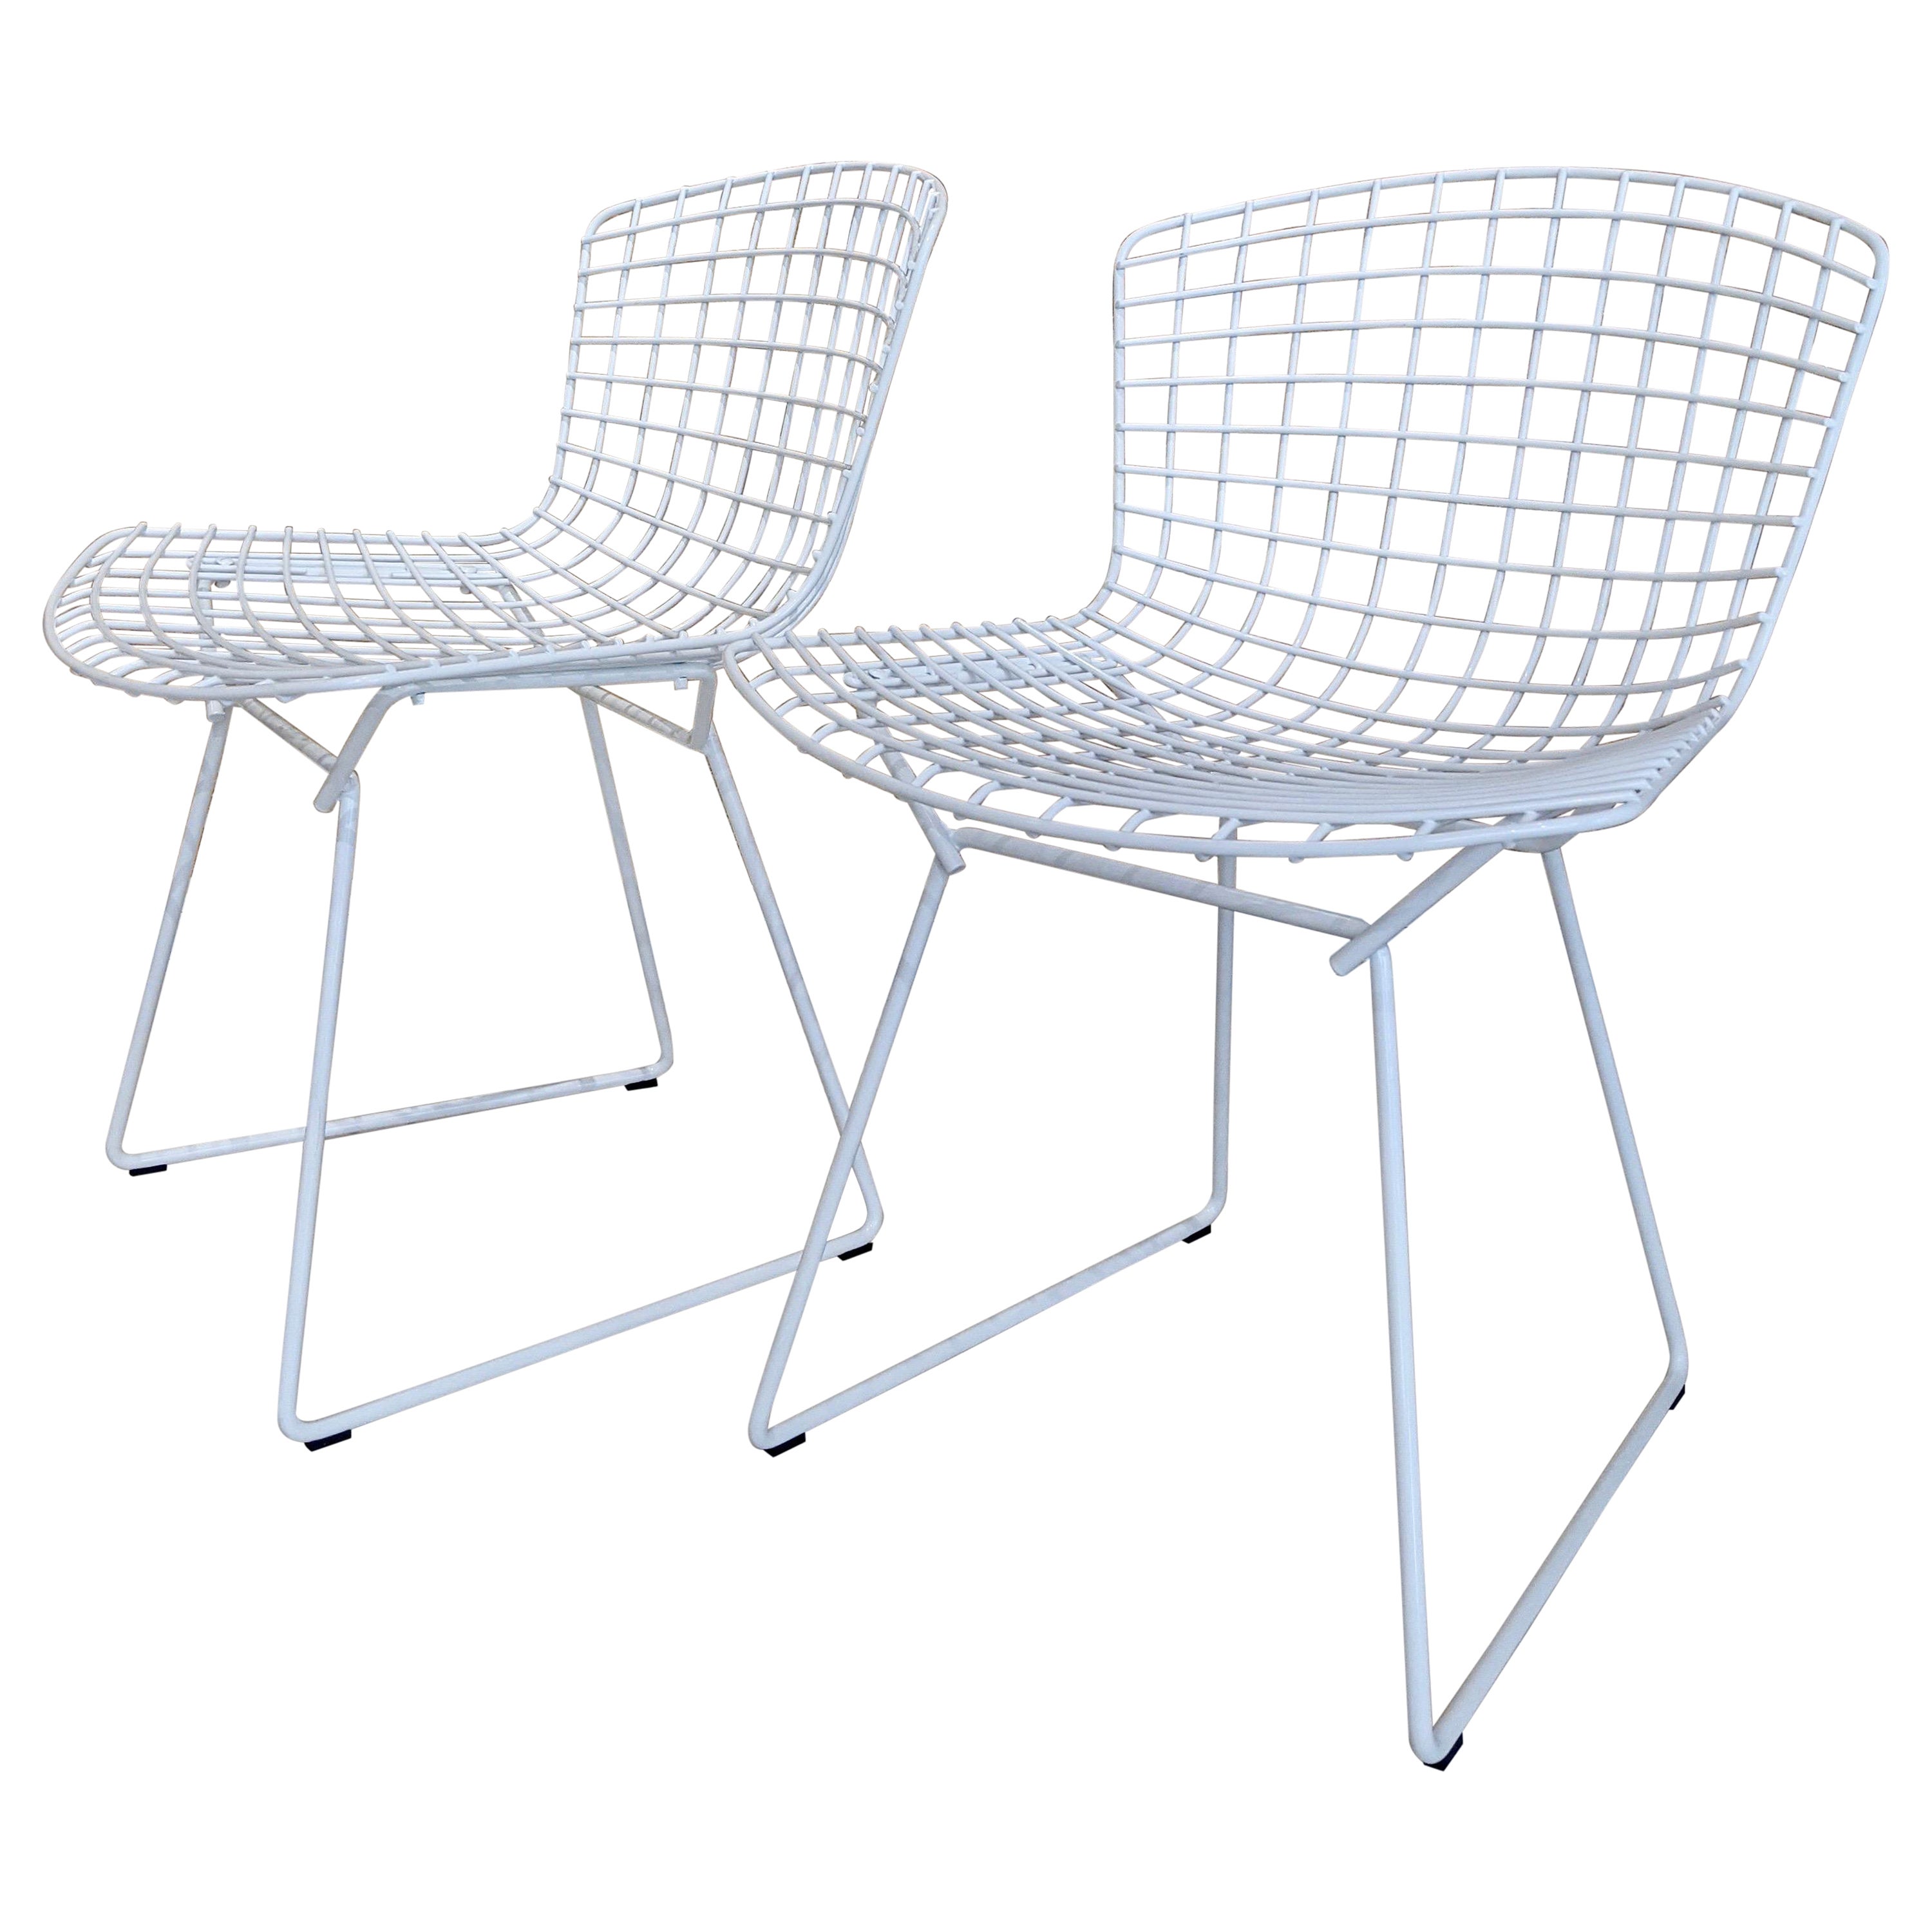 Set of 2 Chairs by Harry Bertoia for Knoll